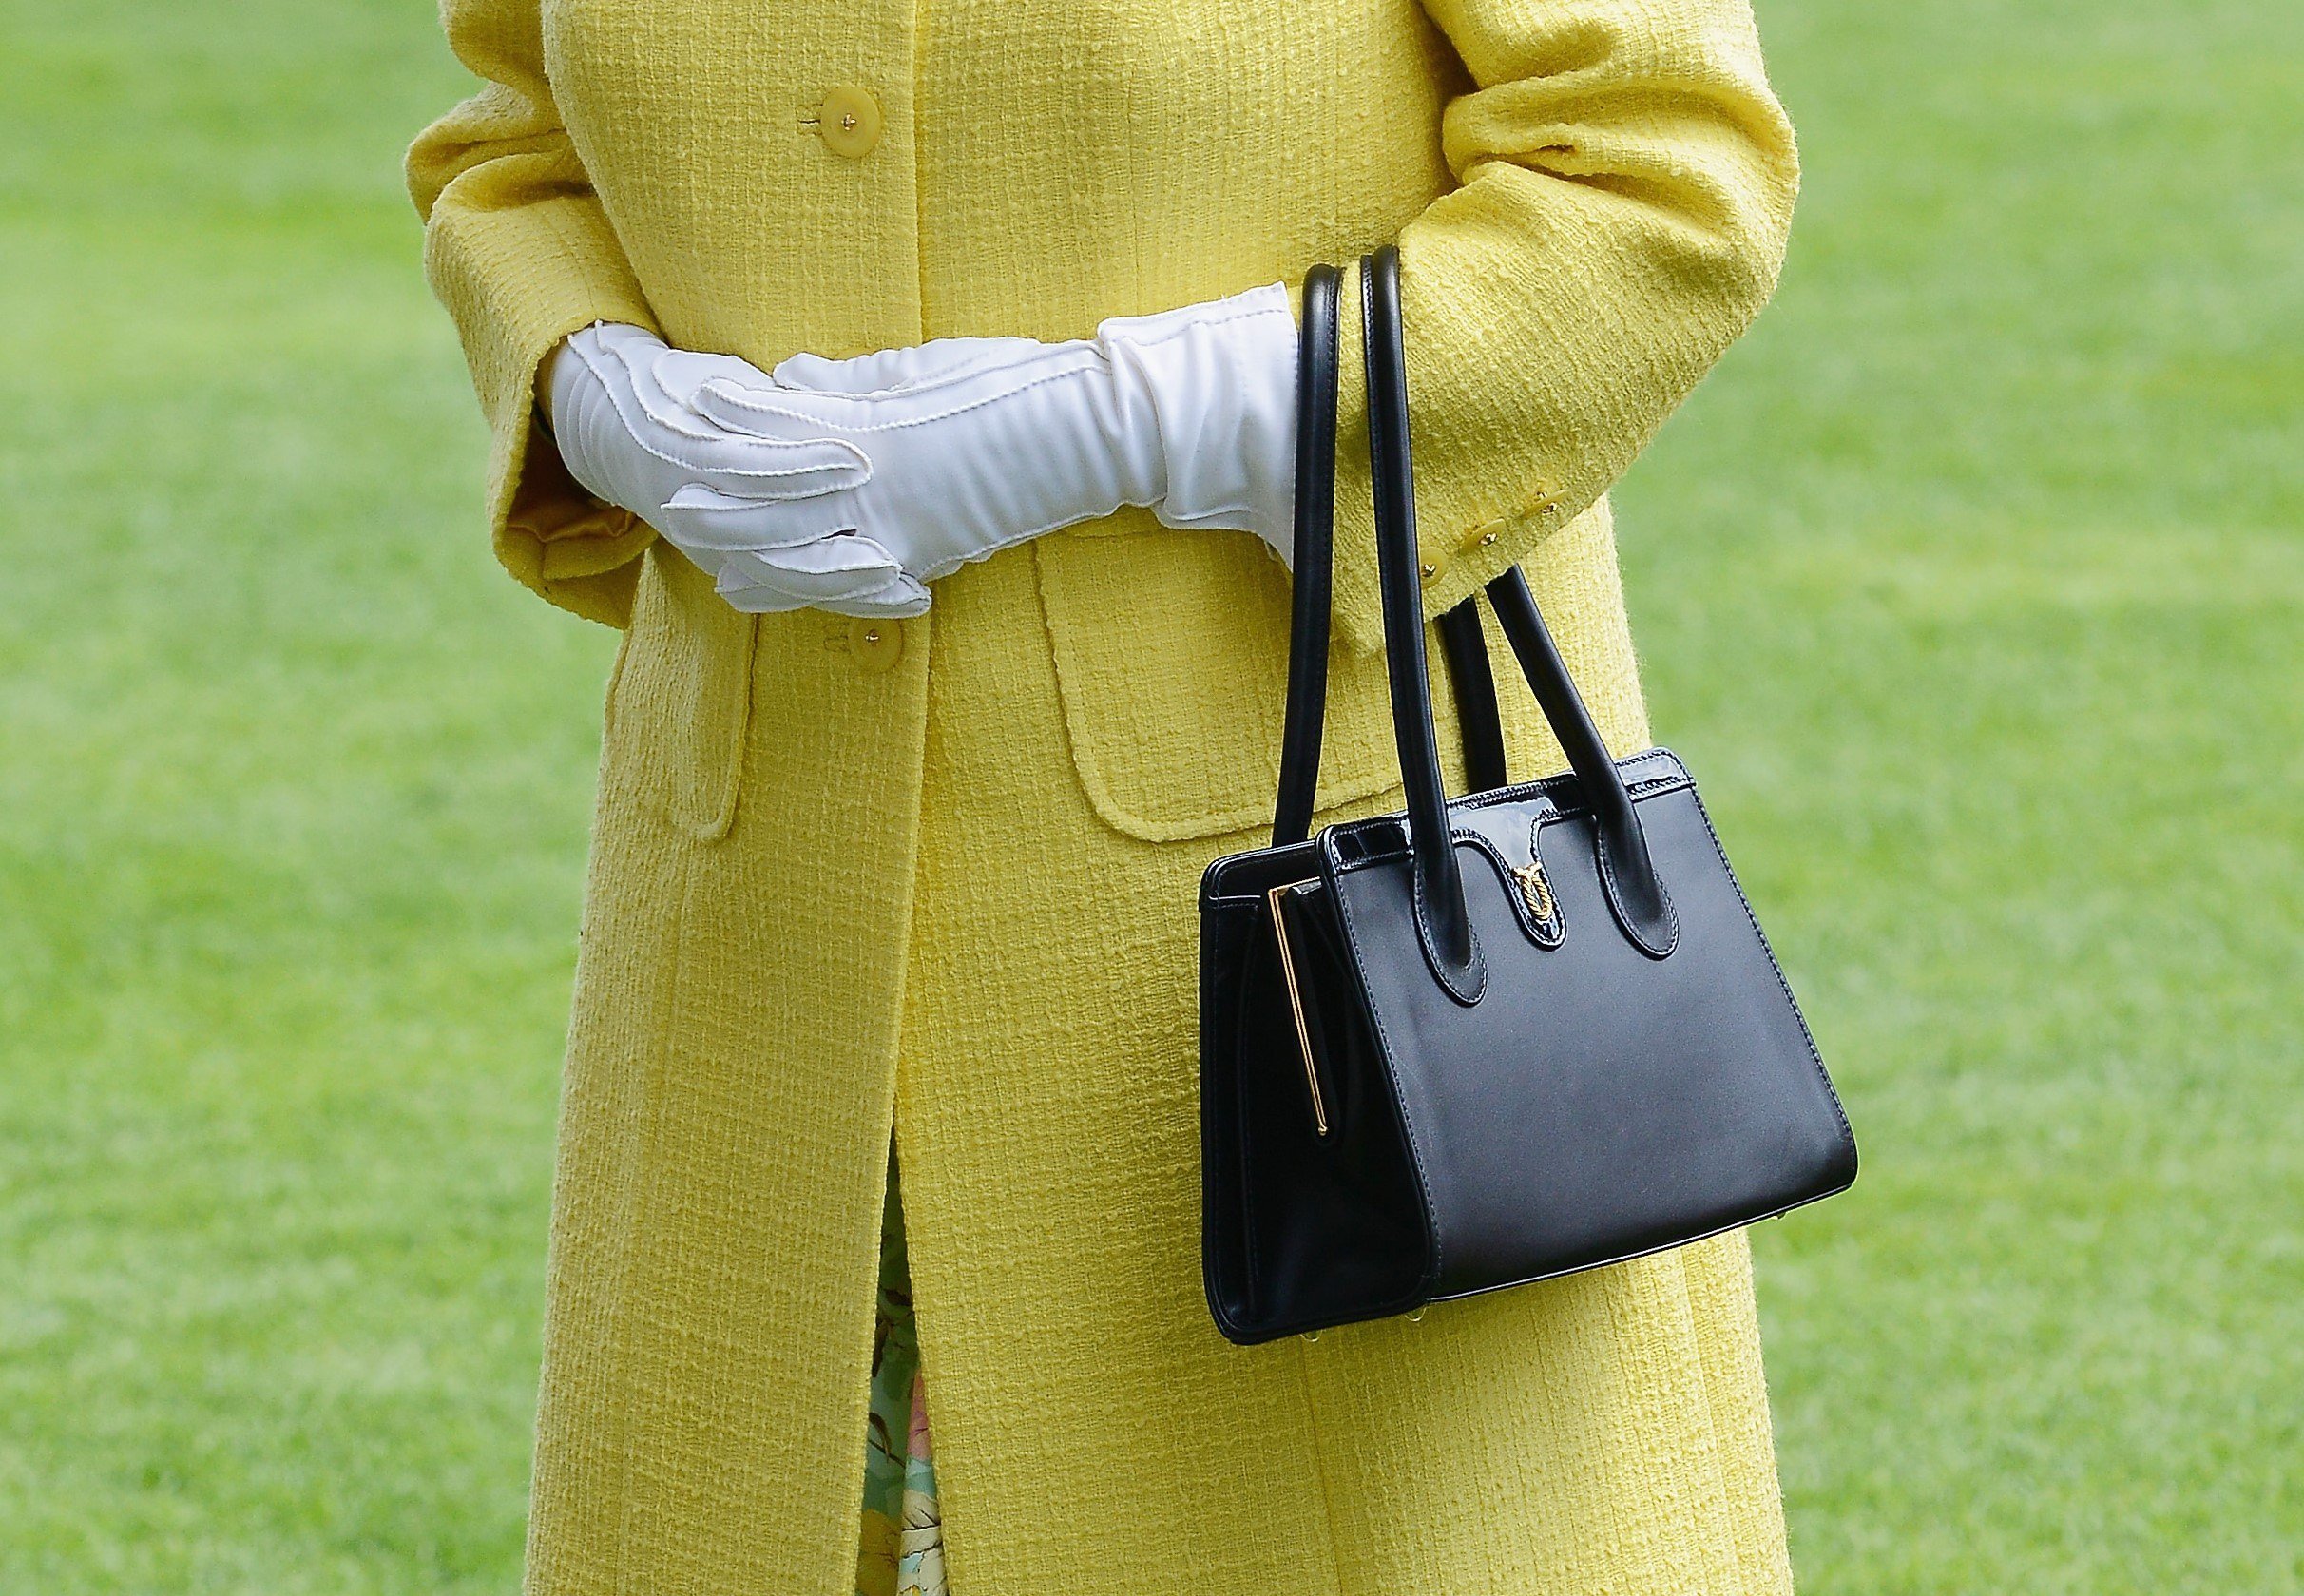 How Does the Queen Use Her Purse? 3 Ways She Sends Secret Messages to Staff